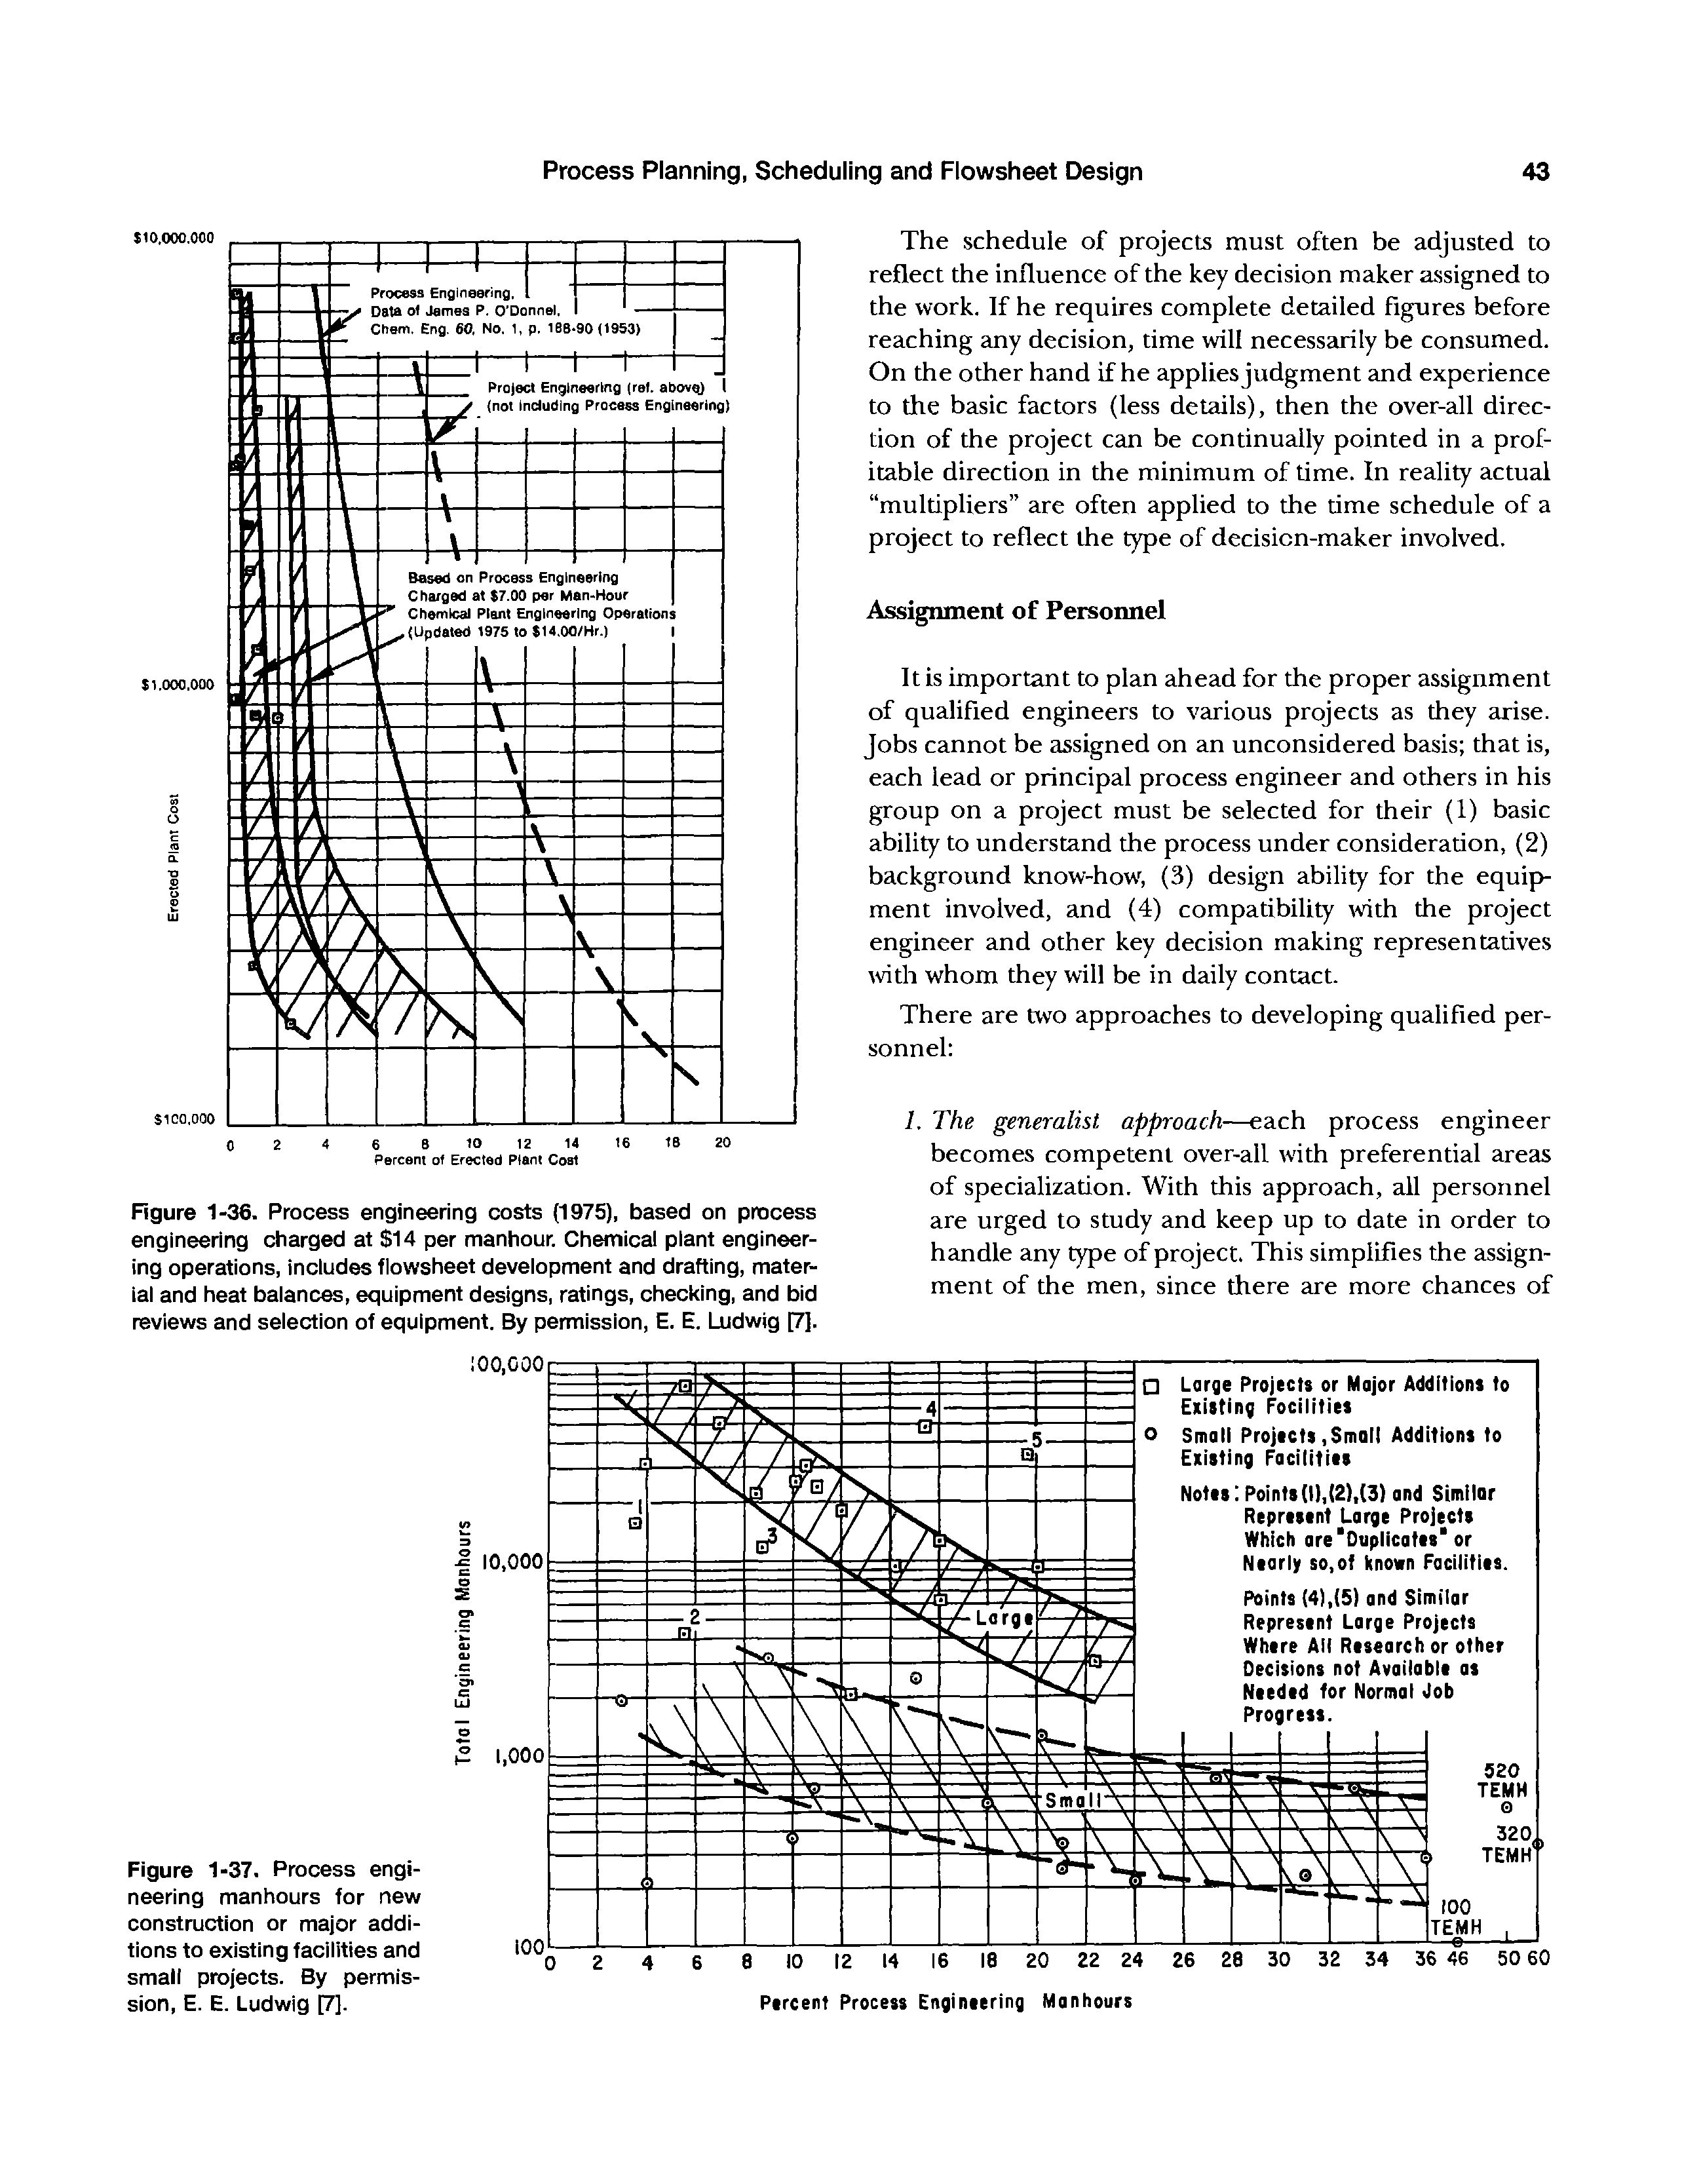 Figure 1-36. Process engineering costs (1975), based on process engineering charged at 14 per manhour. Chemical plant engineering operations, includes flowsheet development and drafting, material and heat balances, equipment designs, ratings, checking, and bid reviews and selection of equipment. By permission, E. E. Ludwig [7].